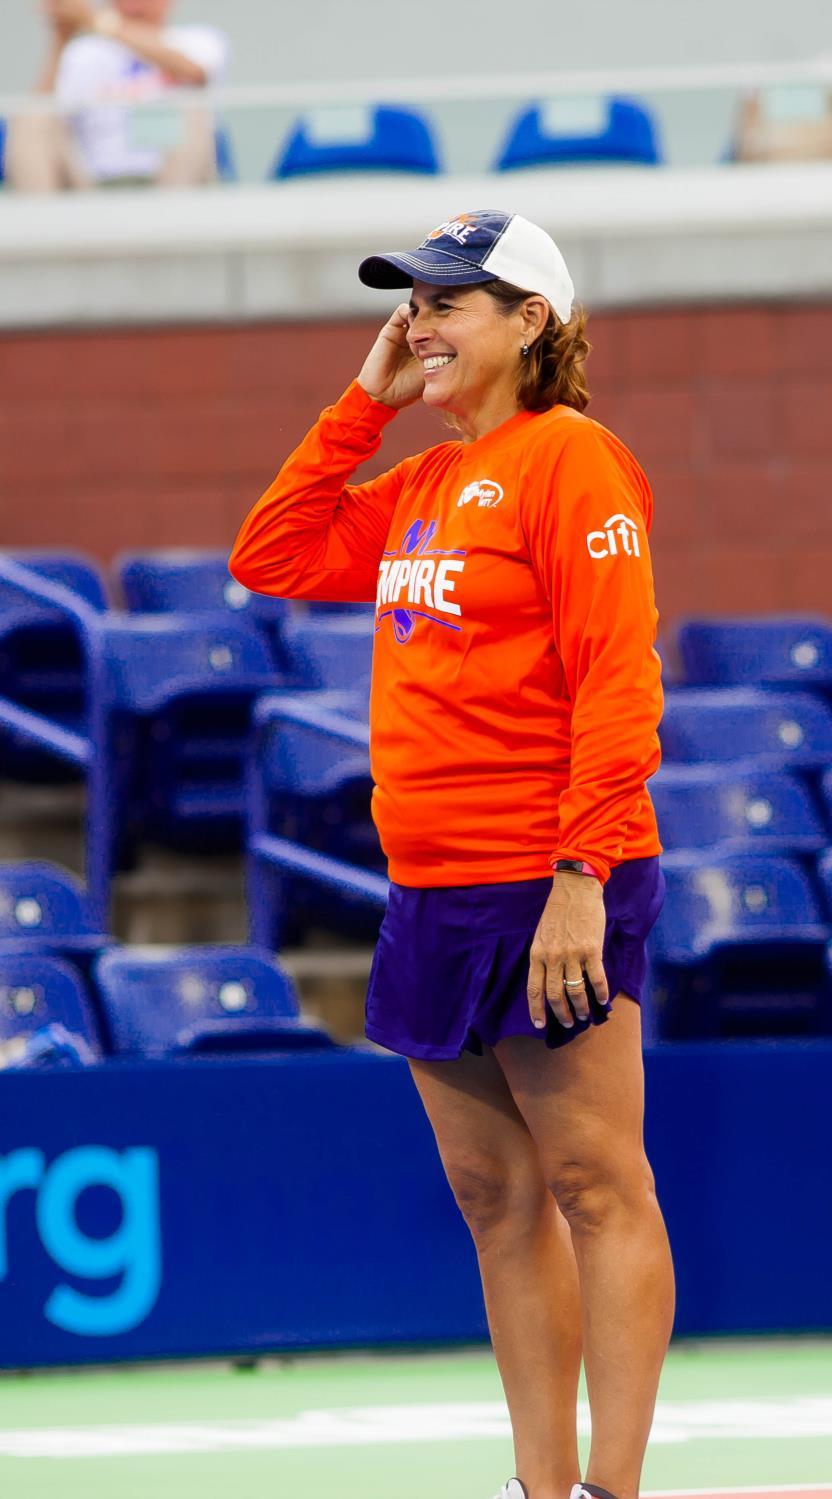 Our Coach As coach for 2017, led the NY Empire to a seven win season, finishing third in the League standings Gigi Fernandez, born in San Juan, Puerto Rico, burst onto the tennis scene by reaching